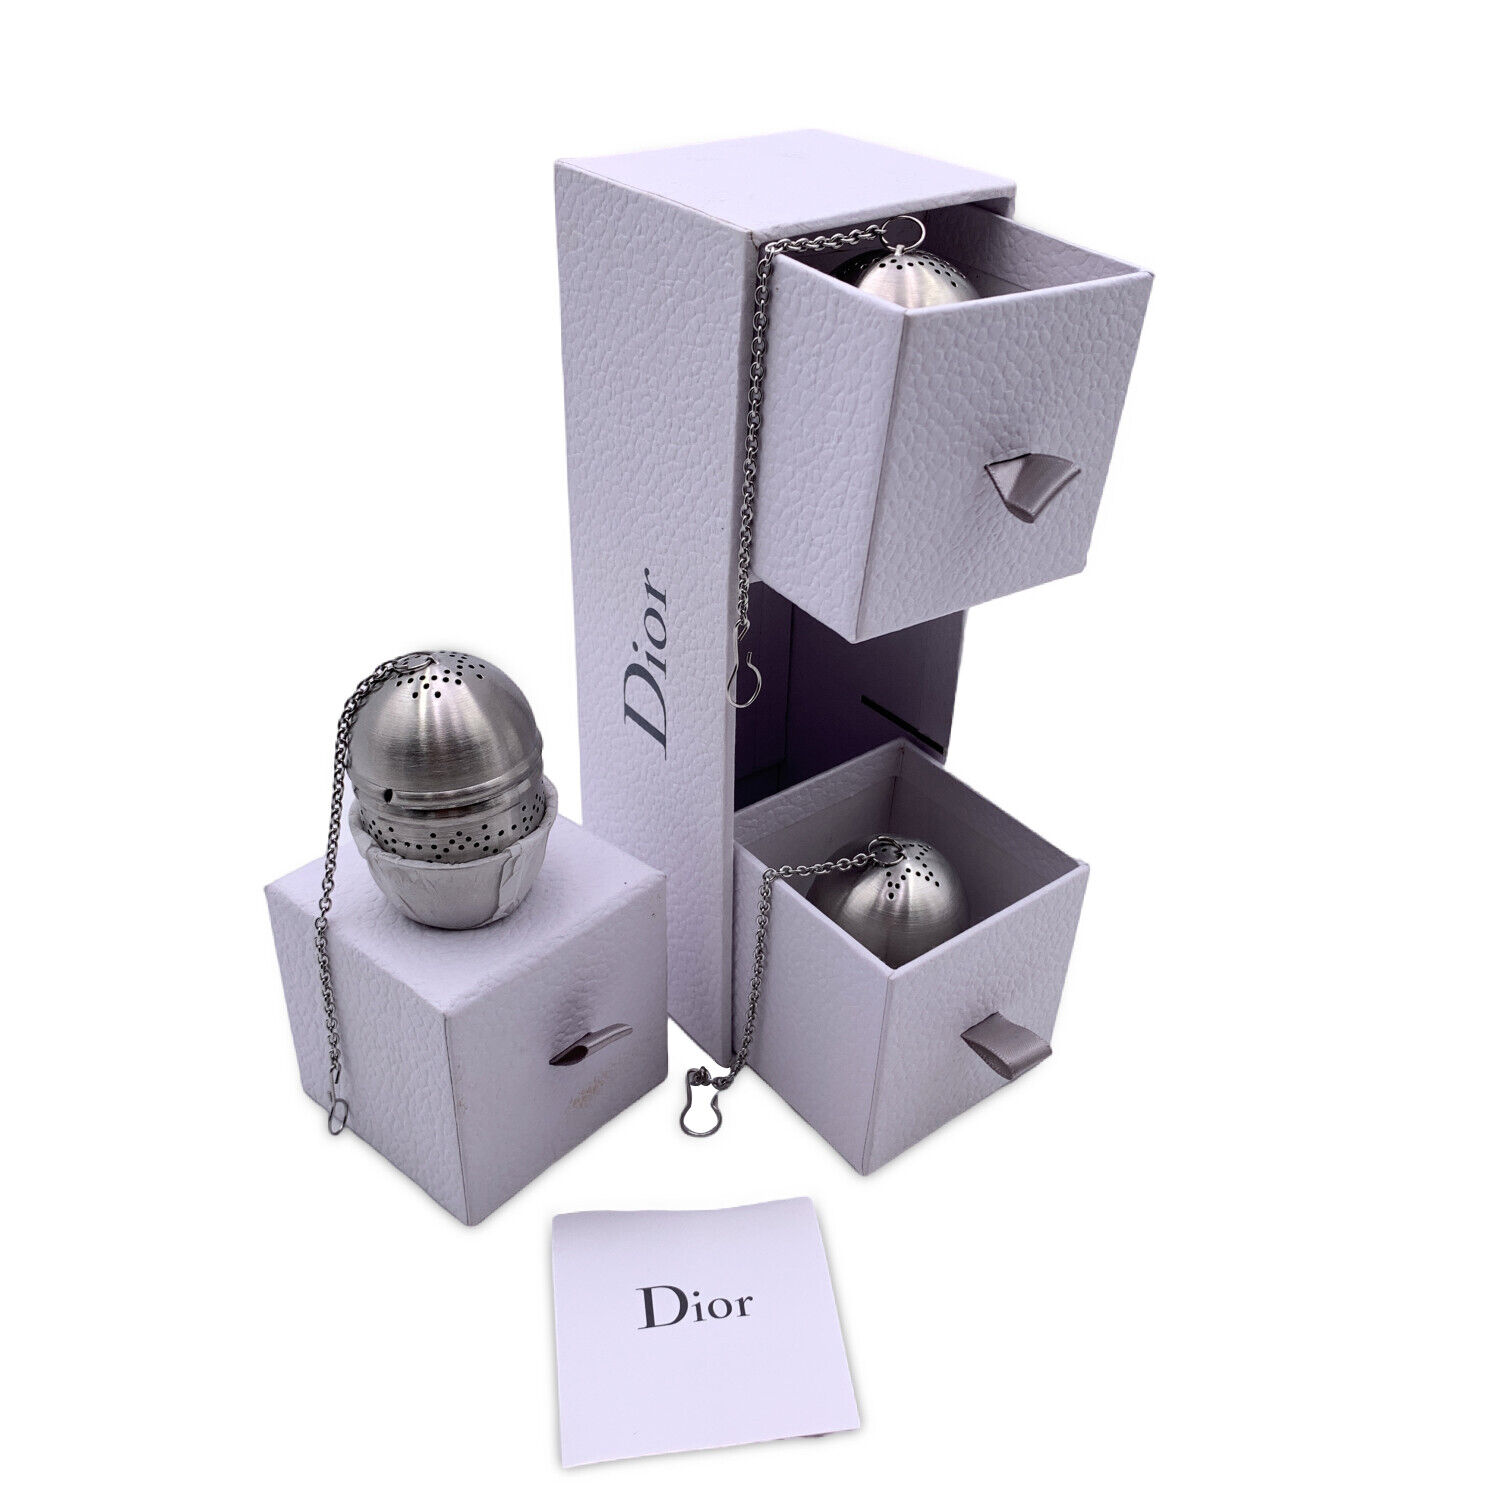 Authentic Christian Dior Limited Edition Tea Time Silver Metal Tea Infuser Set